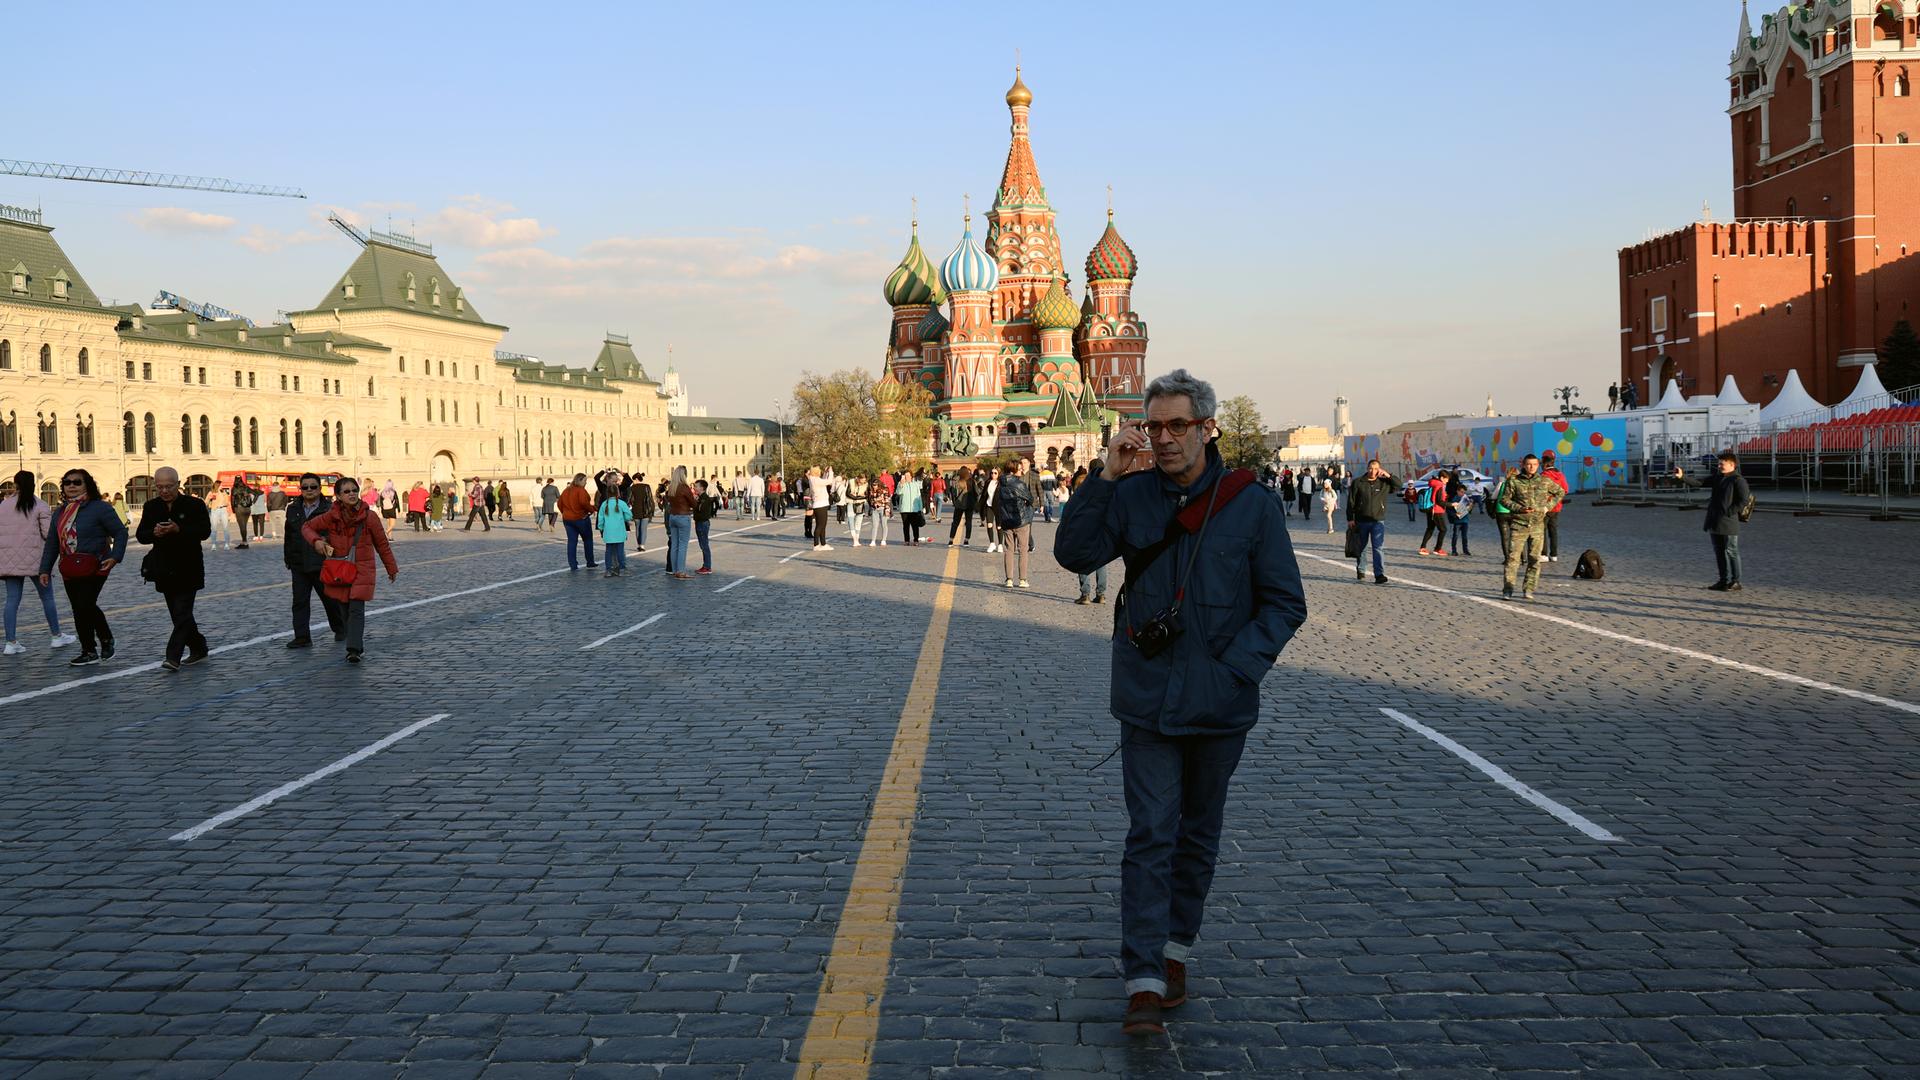 Marco Werman walks across Red Square in Moscow. Behind him is the iconic St. Basil's Cathedral. 